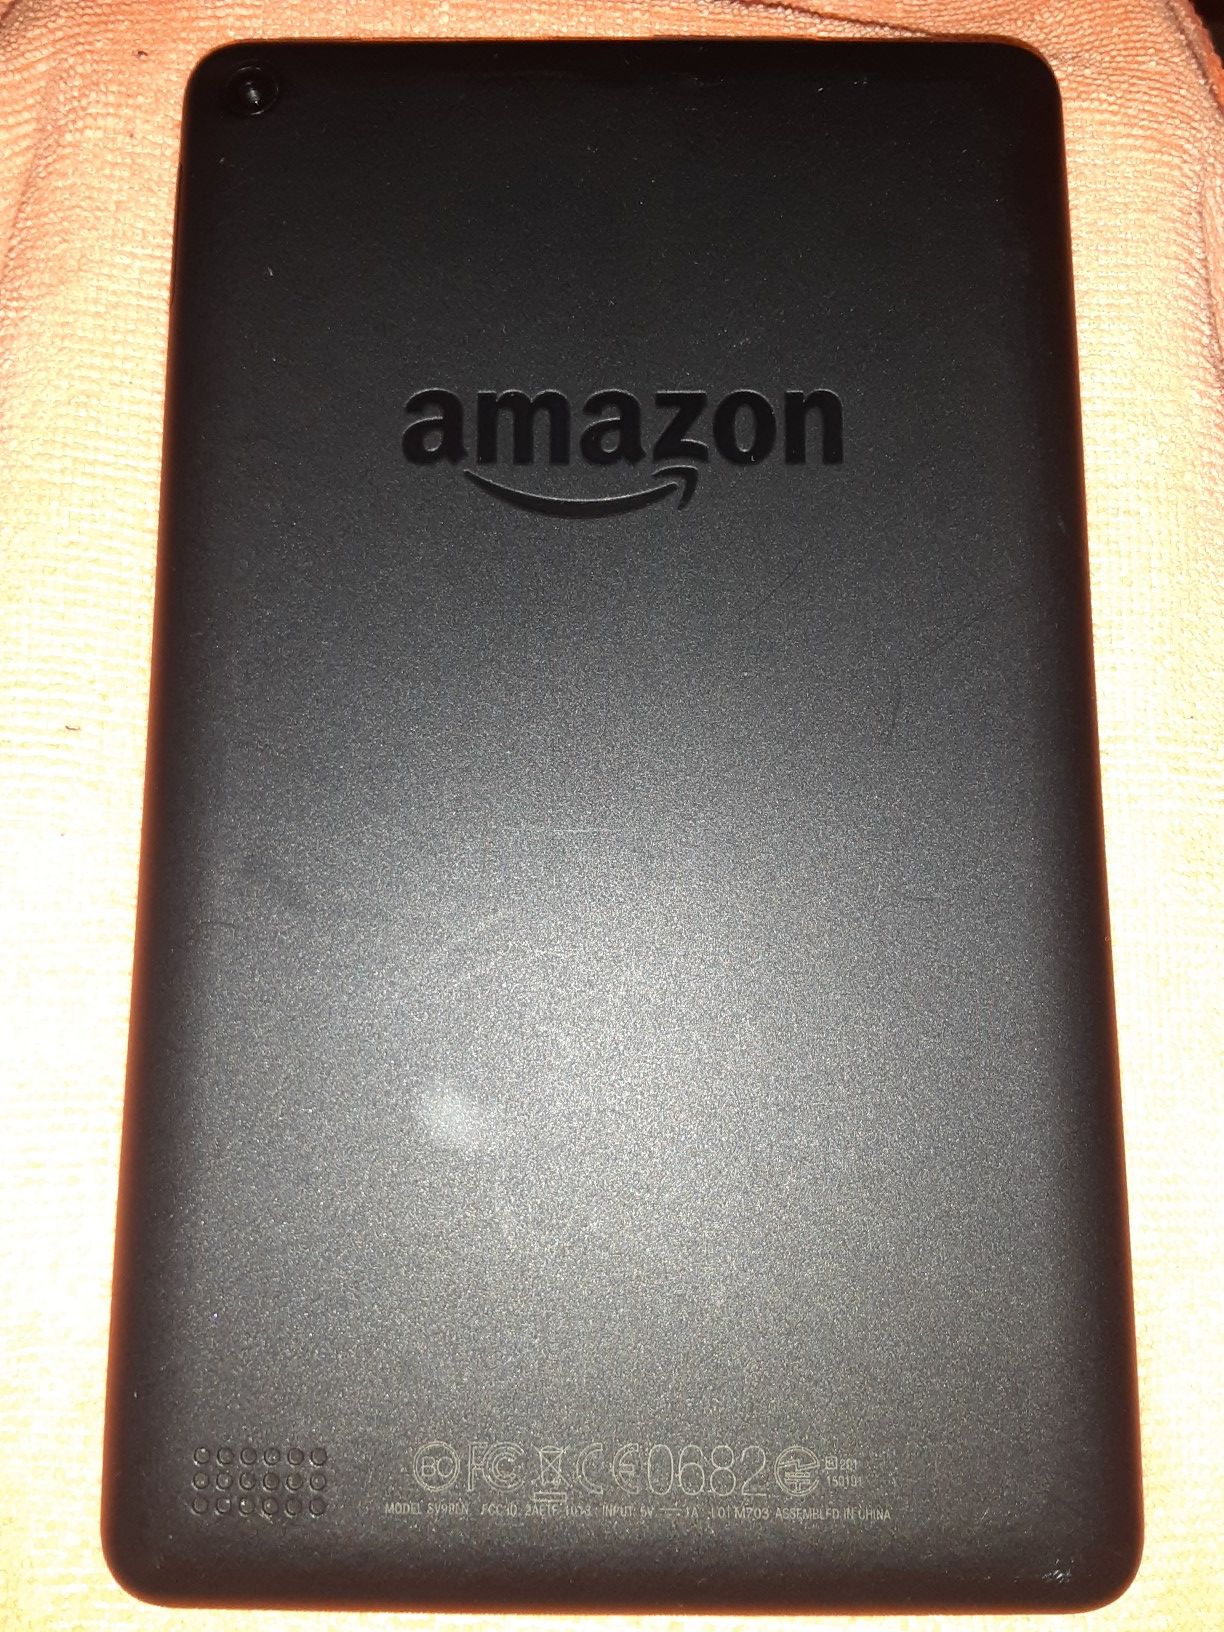 Kindle fire tablet!